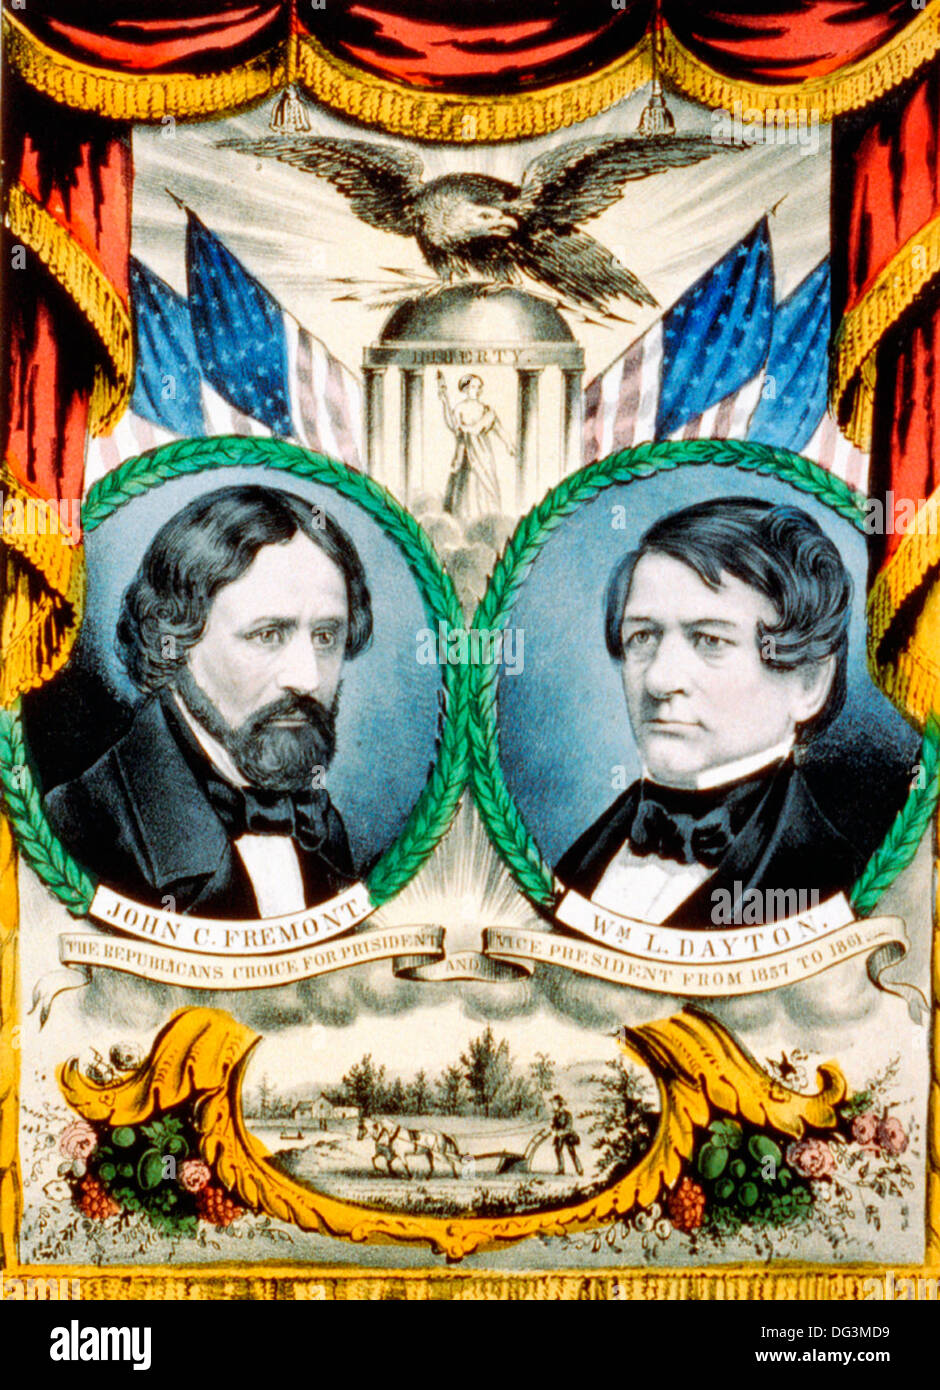 1856 USA Presidential Election Poster - Republican Party - John C Fremont and William L Dayton. Stock Photo